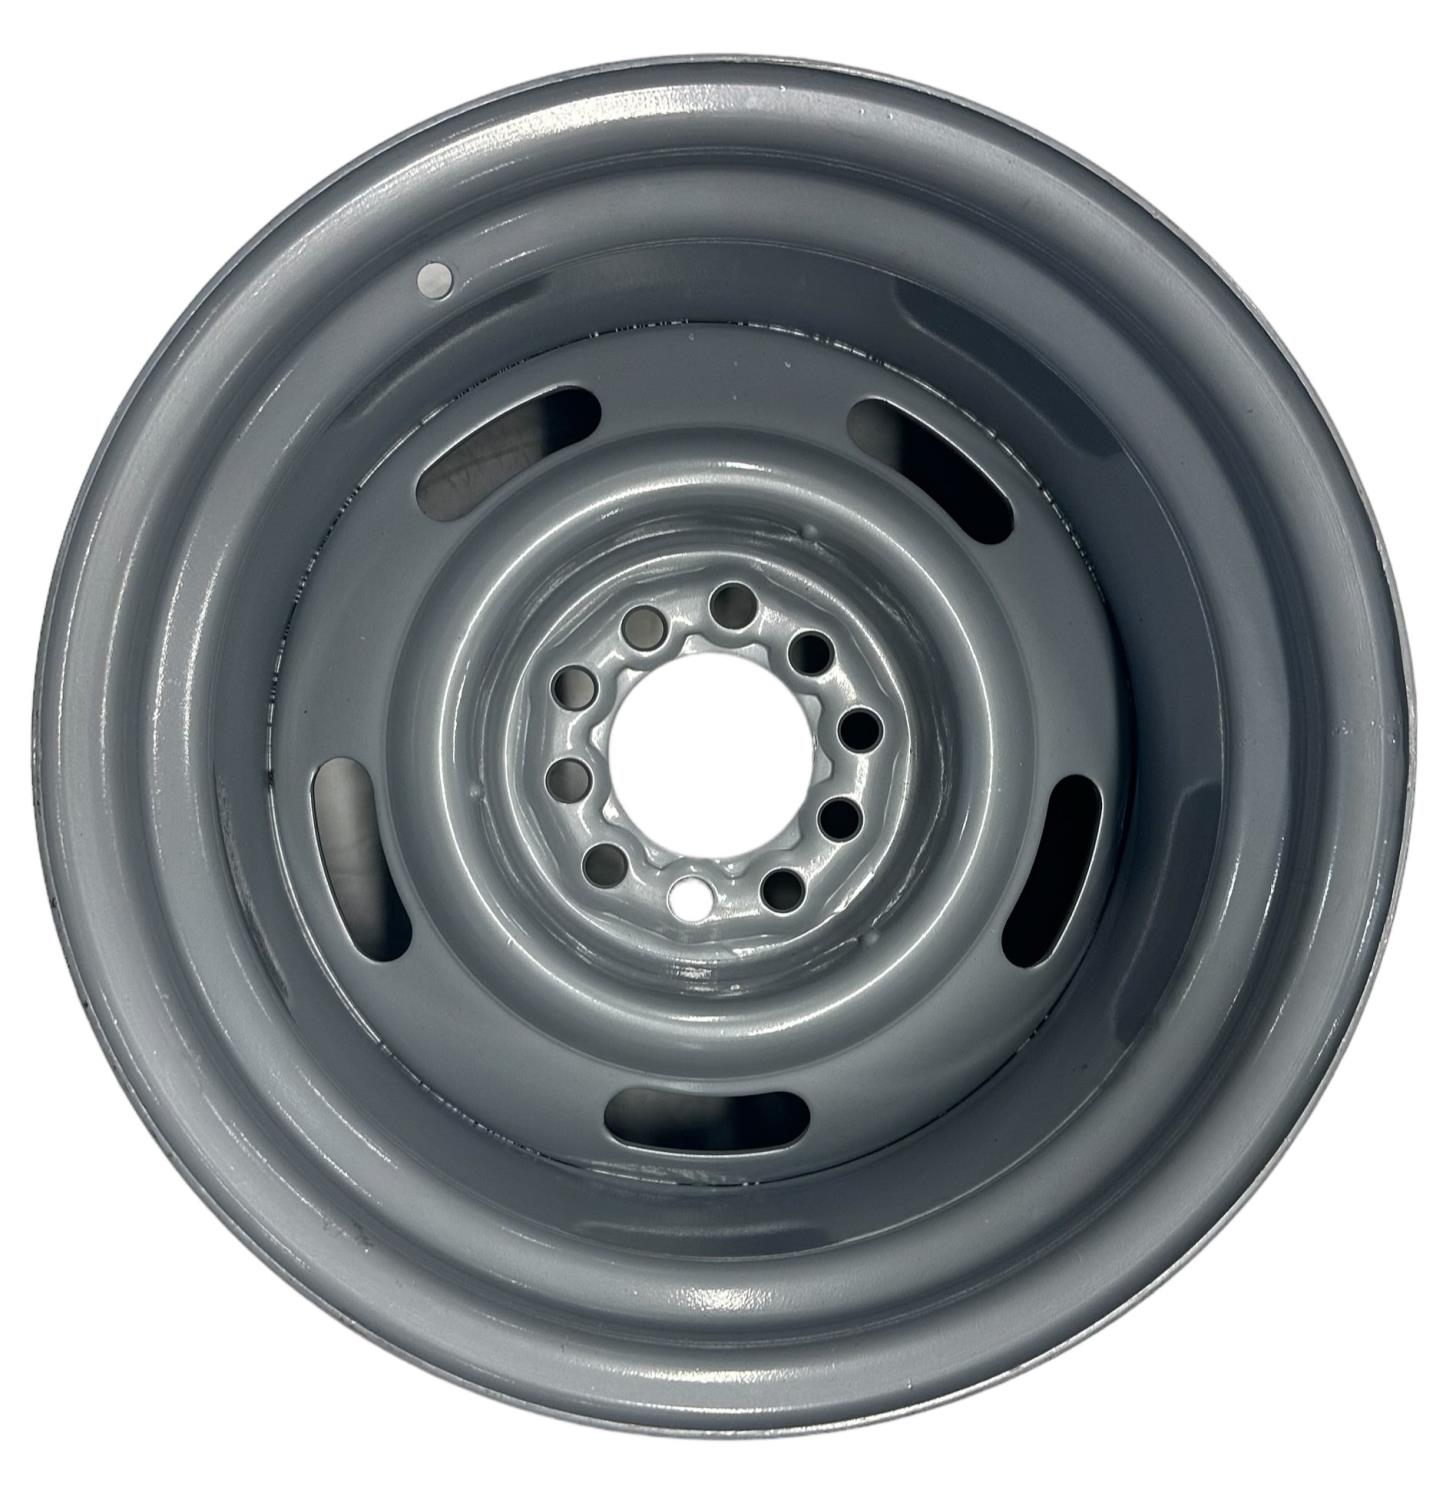 *BLEMISHED 55 Rally Series Wheel Size: 15" x 10", Bolt Pattern: 5 x 4.50"/5 x 4.75" [Silver Finish]